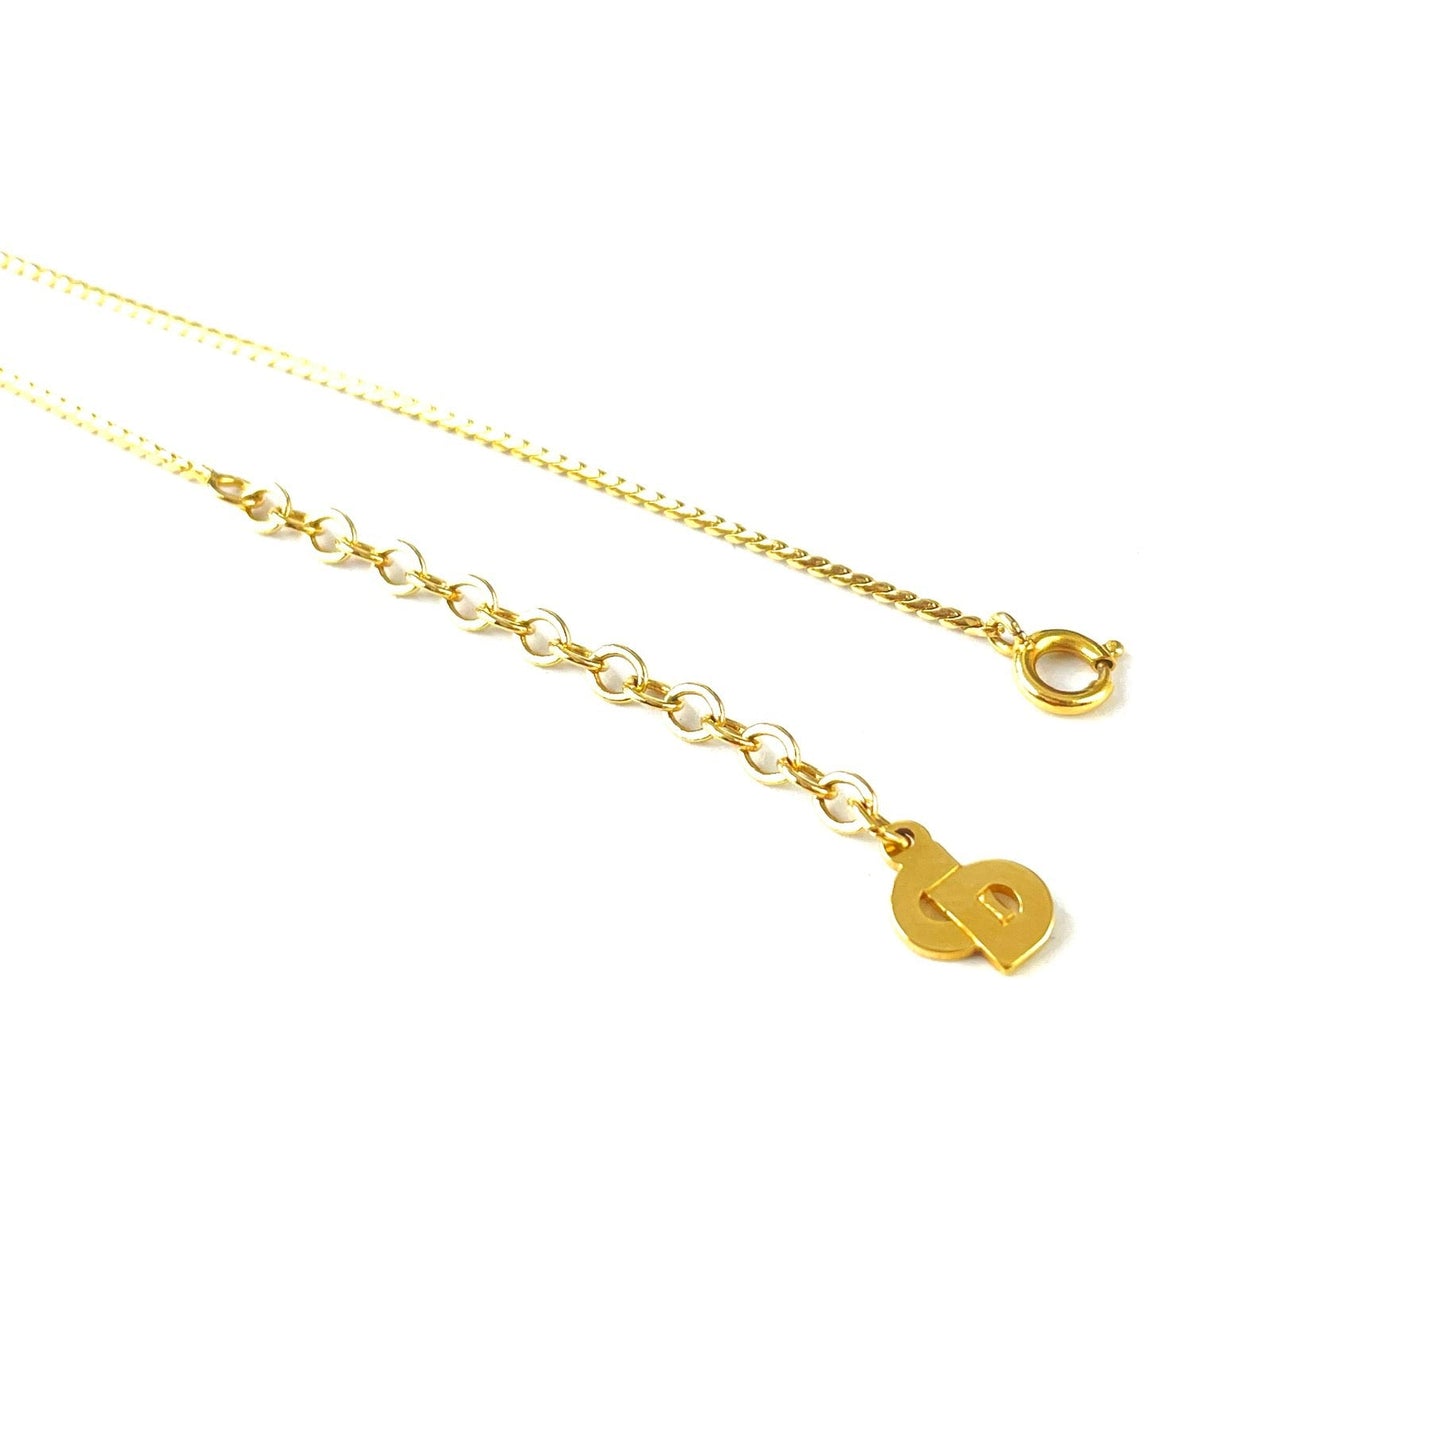 Christian Dior Logo Necklace Gold Vintage Old aswewc